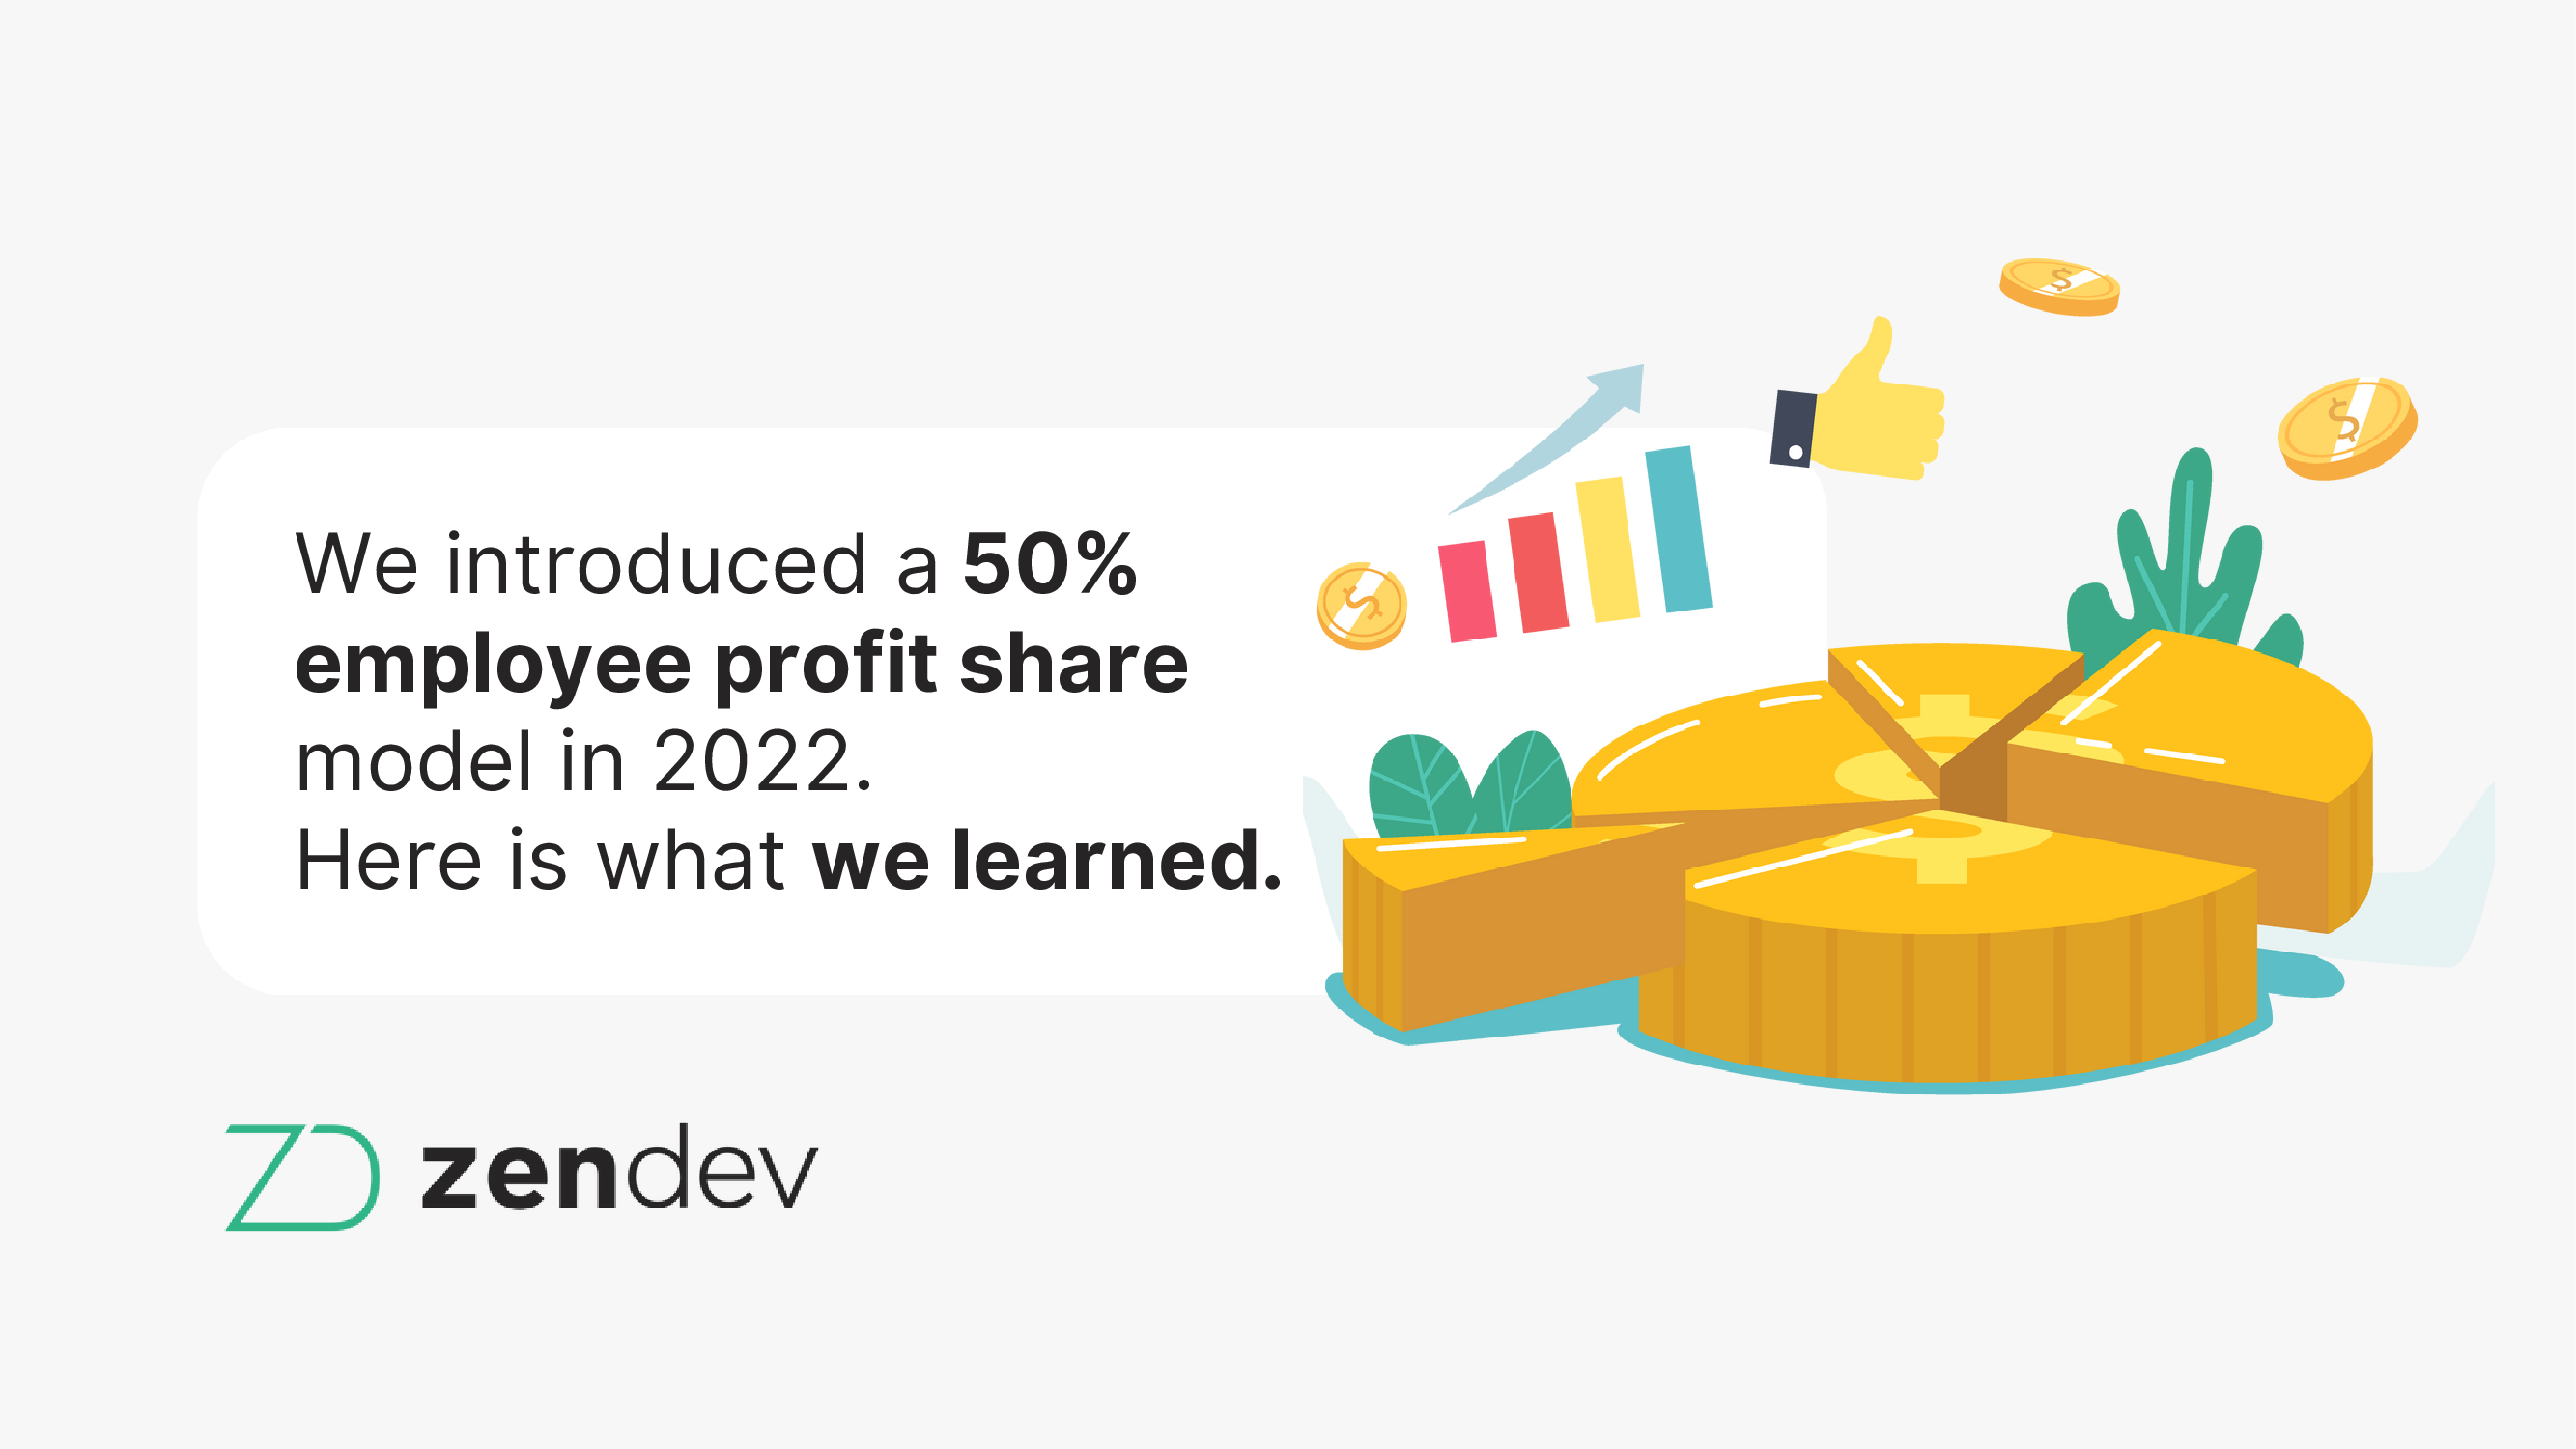 We introduced a 50 employee profit share model in 2022. Here is what